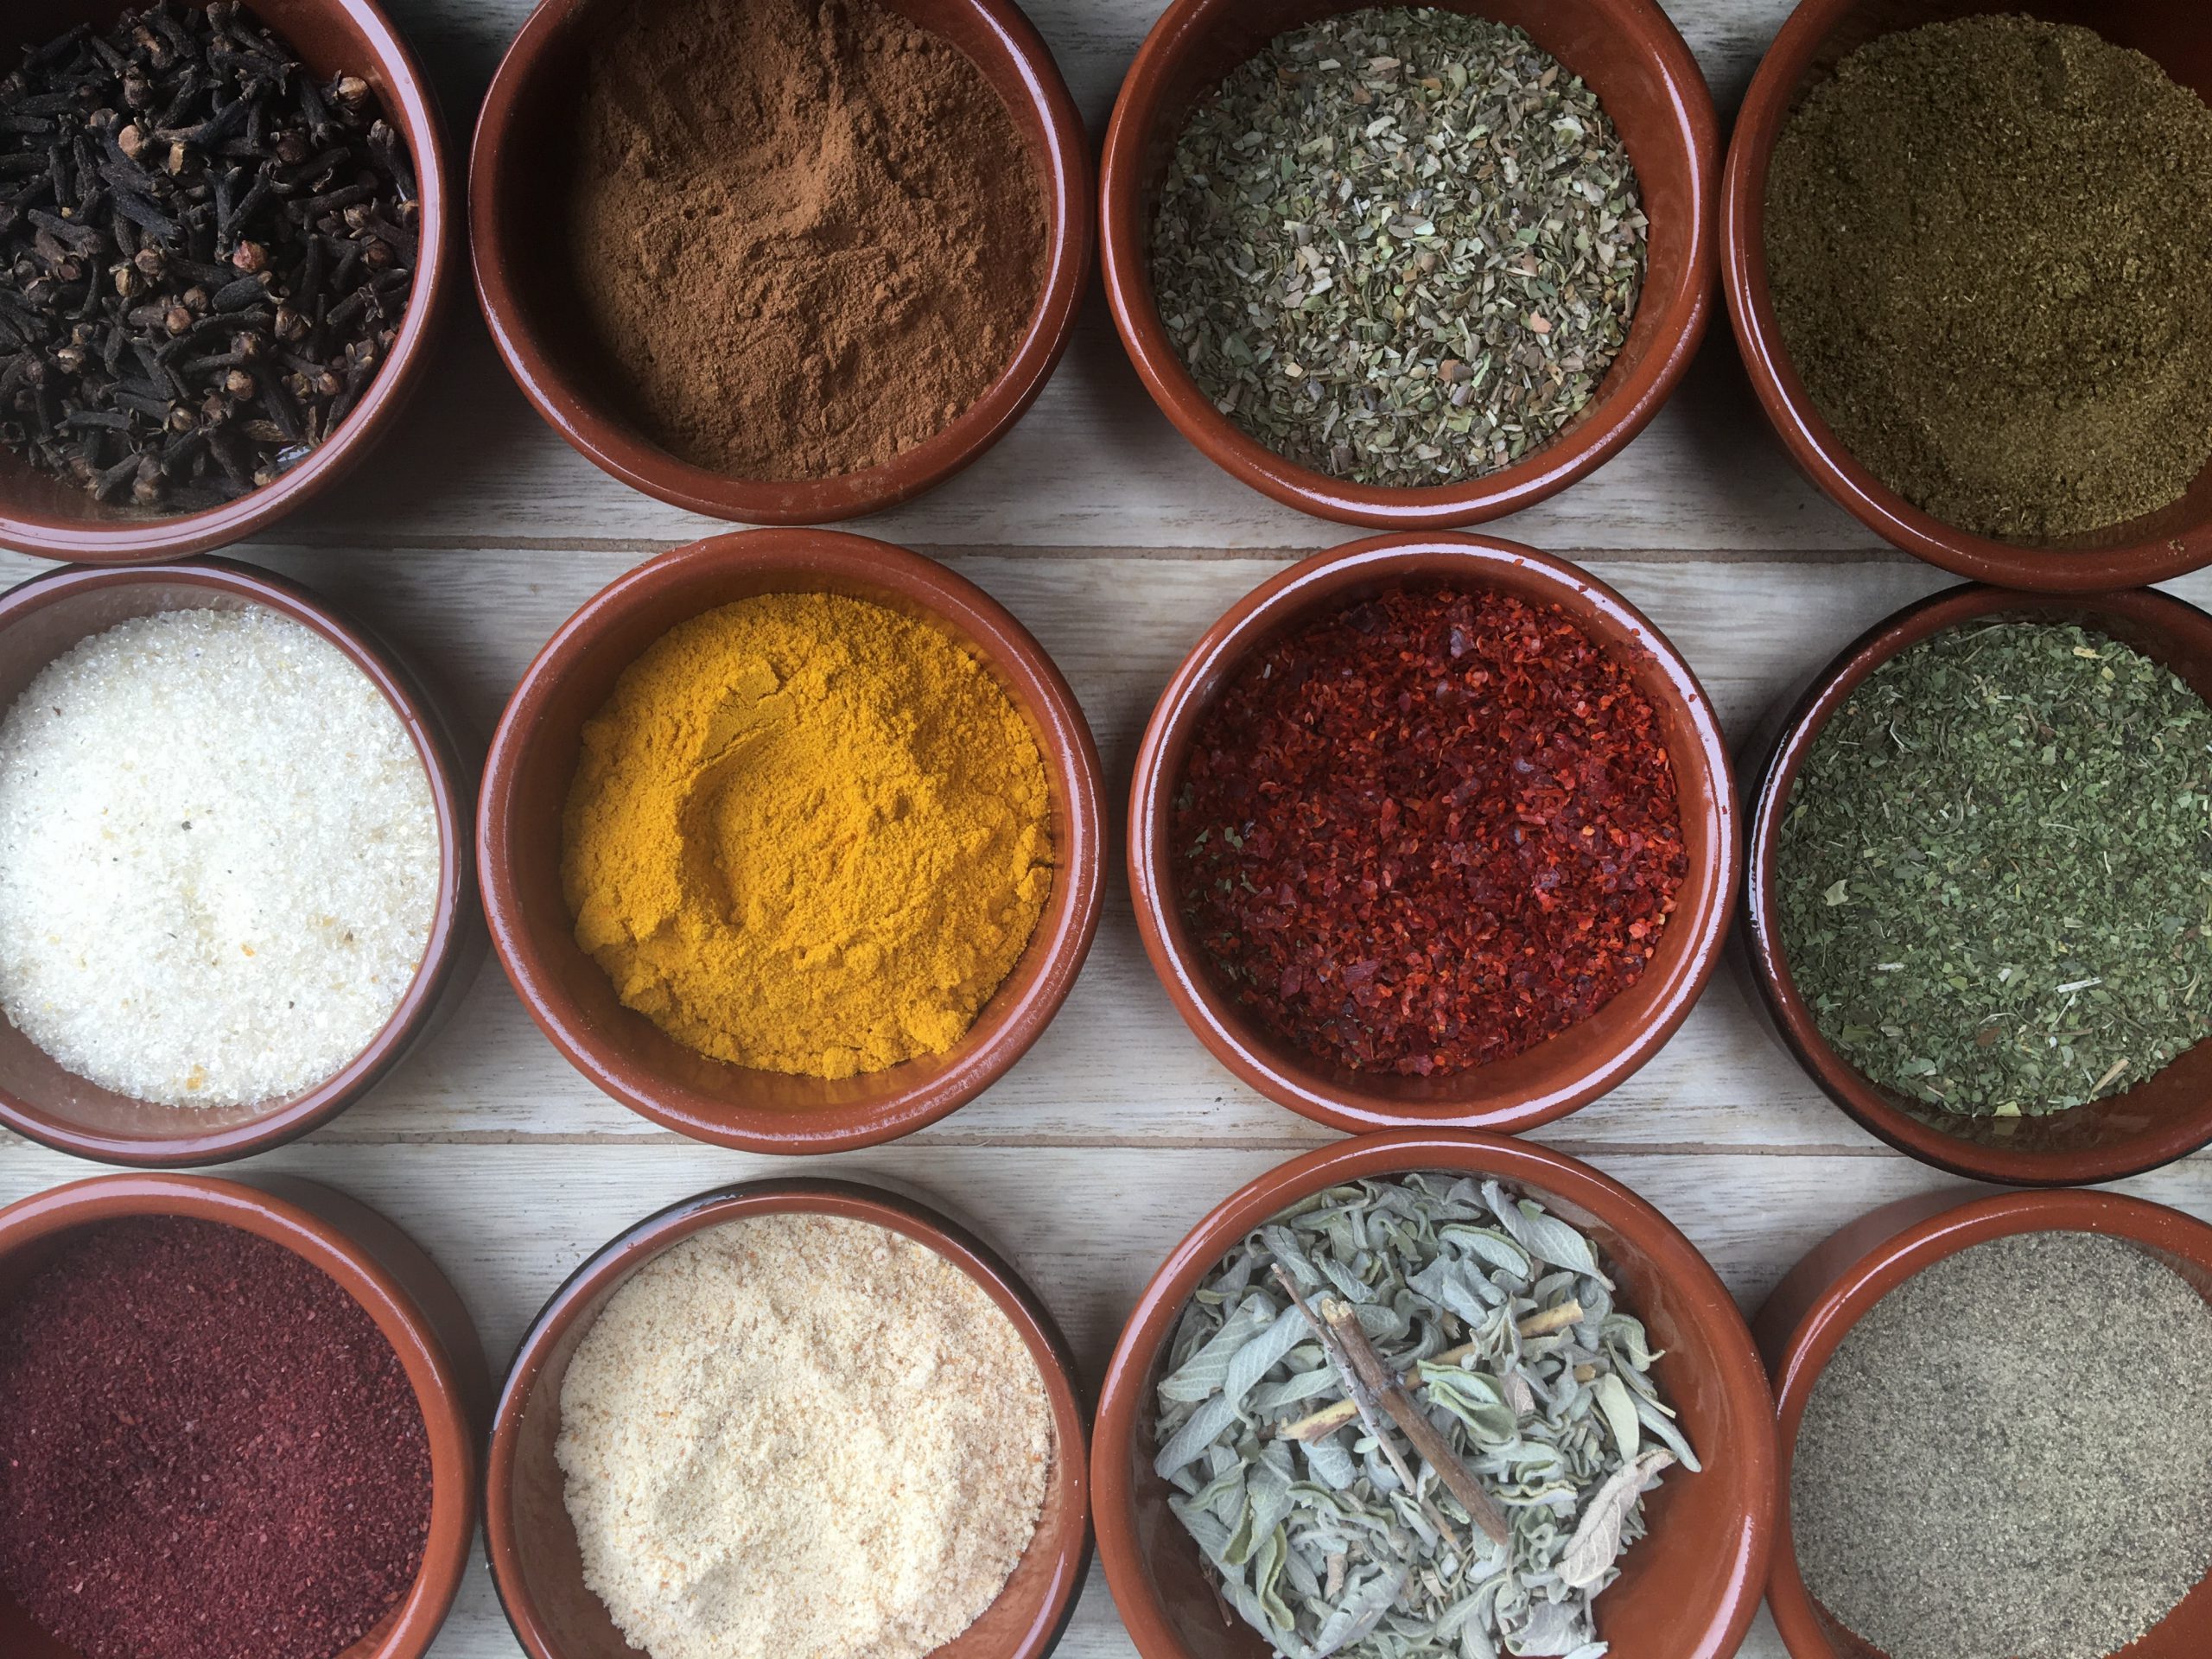 Blending spices: What type of mixer should you use?